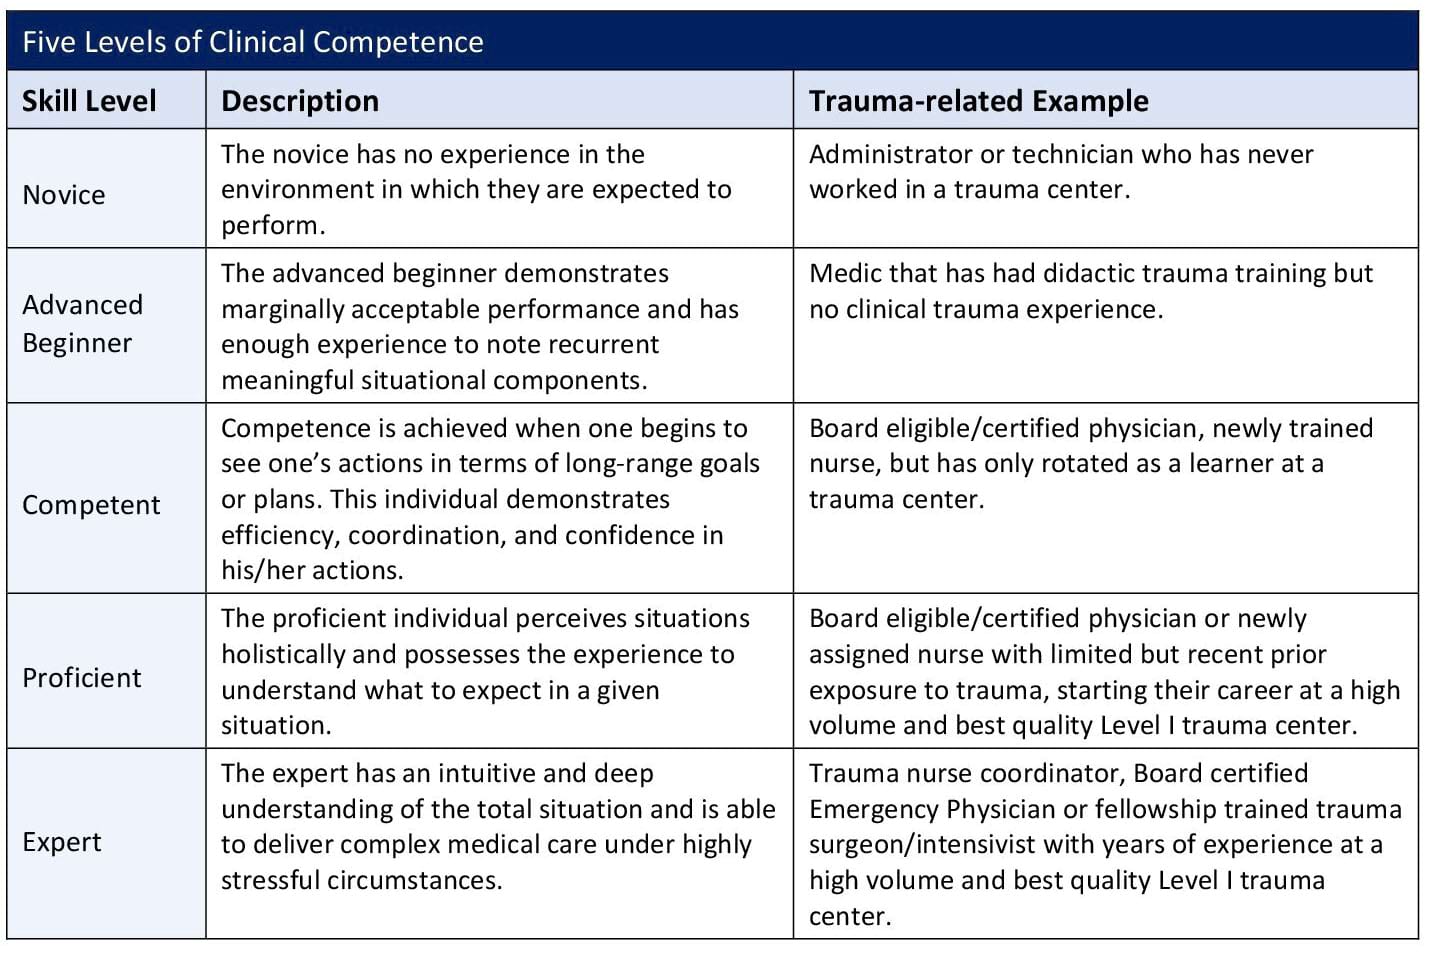 Five Levels of Clinical Competence